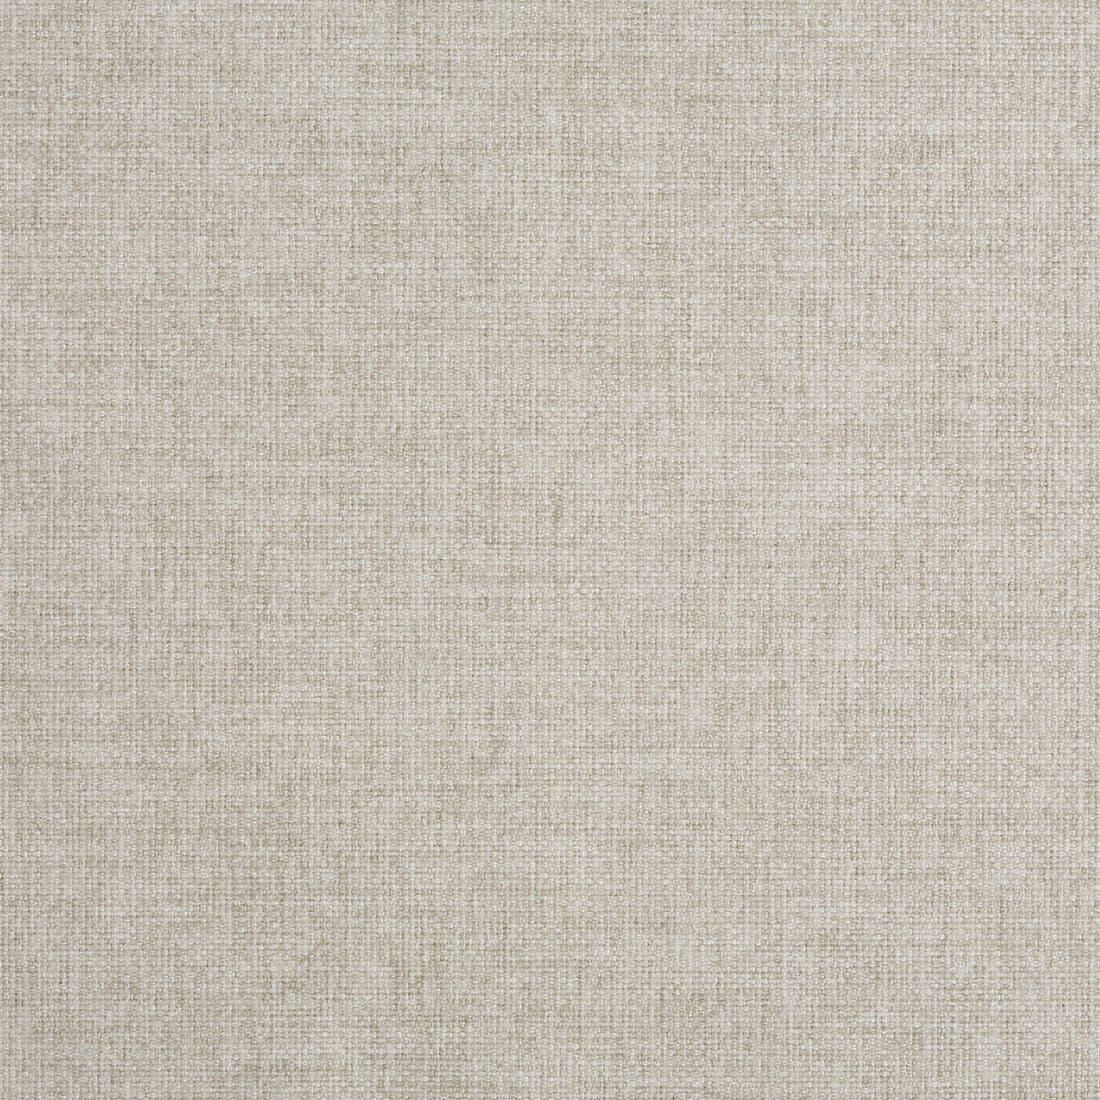 Kravet Contract fabric in 35122-111 color - pattern 35122.111.0 - by Kravet Contract in the Crypton Incase collection